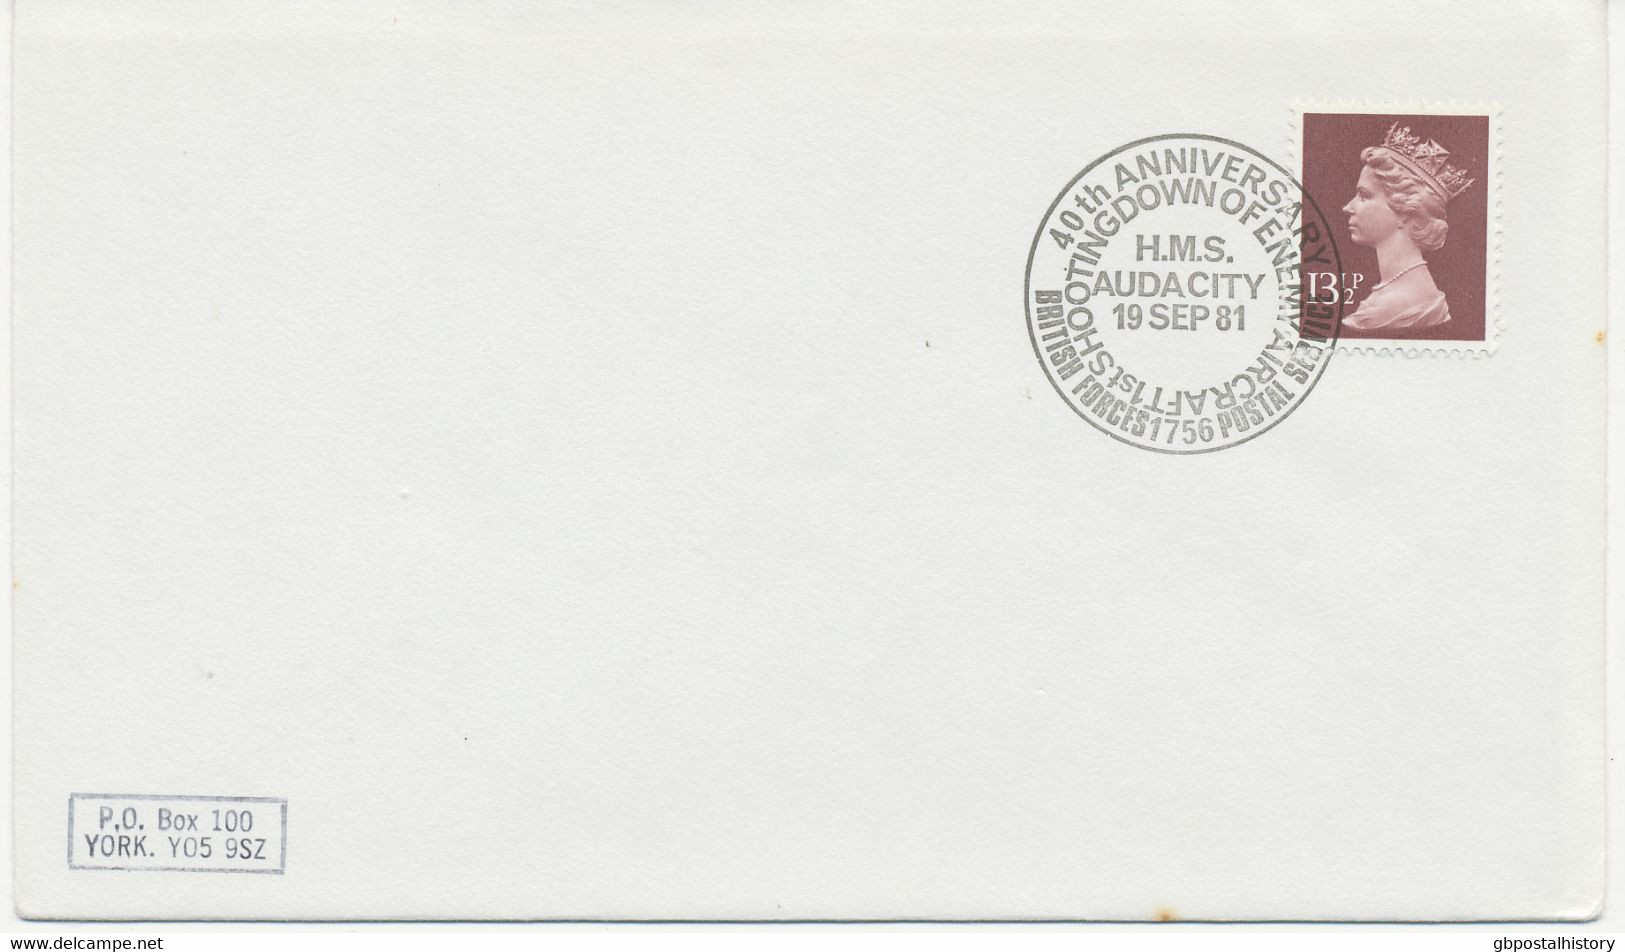 GB SPECIAL EVENT POSTMARKS 40th ANNIVERSARY 1st SHOOTING DOWN OF ENEMY AIRCRAFT H.M.S. AUDACITY 19 SEP 81 - BRITISH FORC - Marcophilie